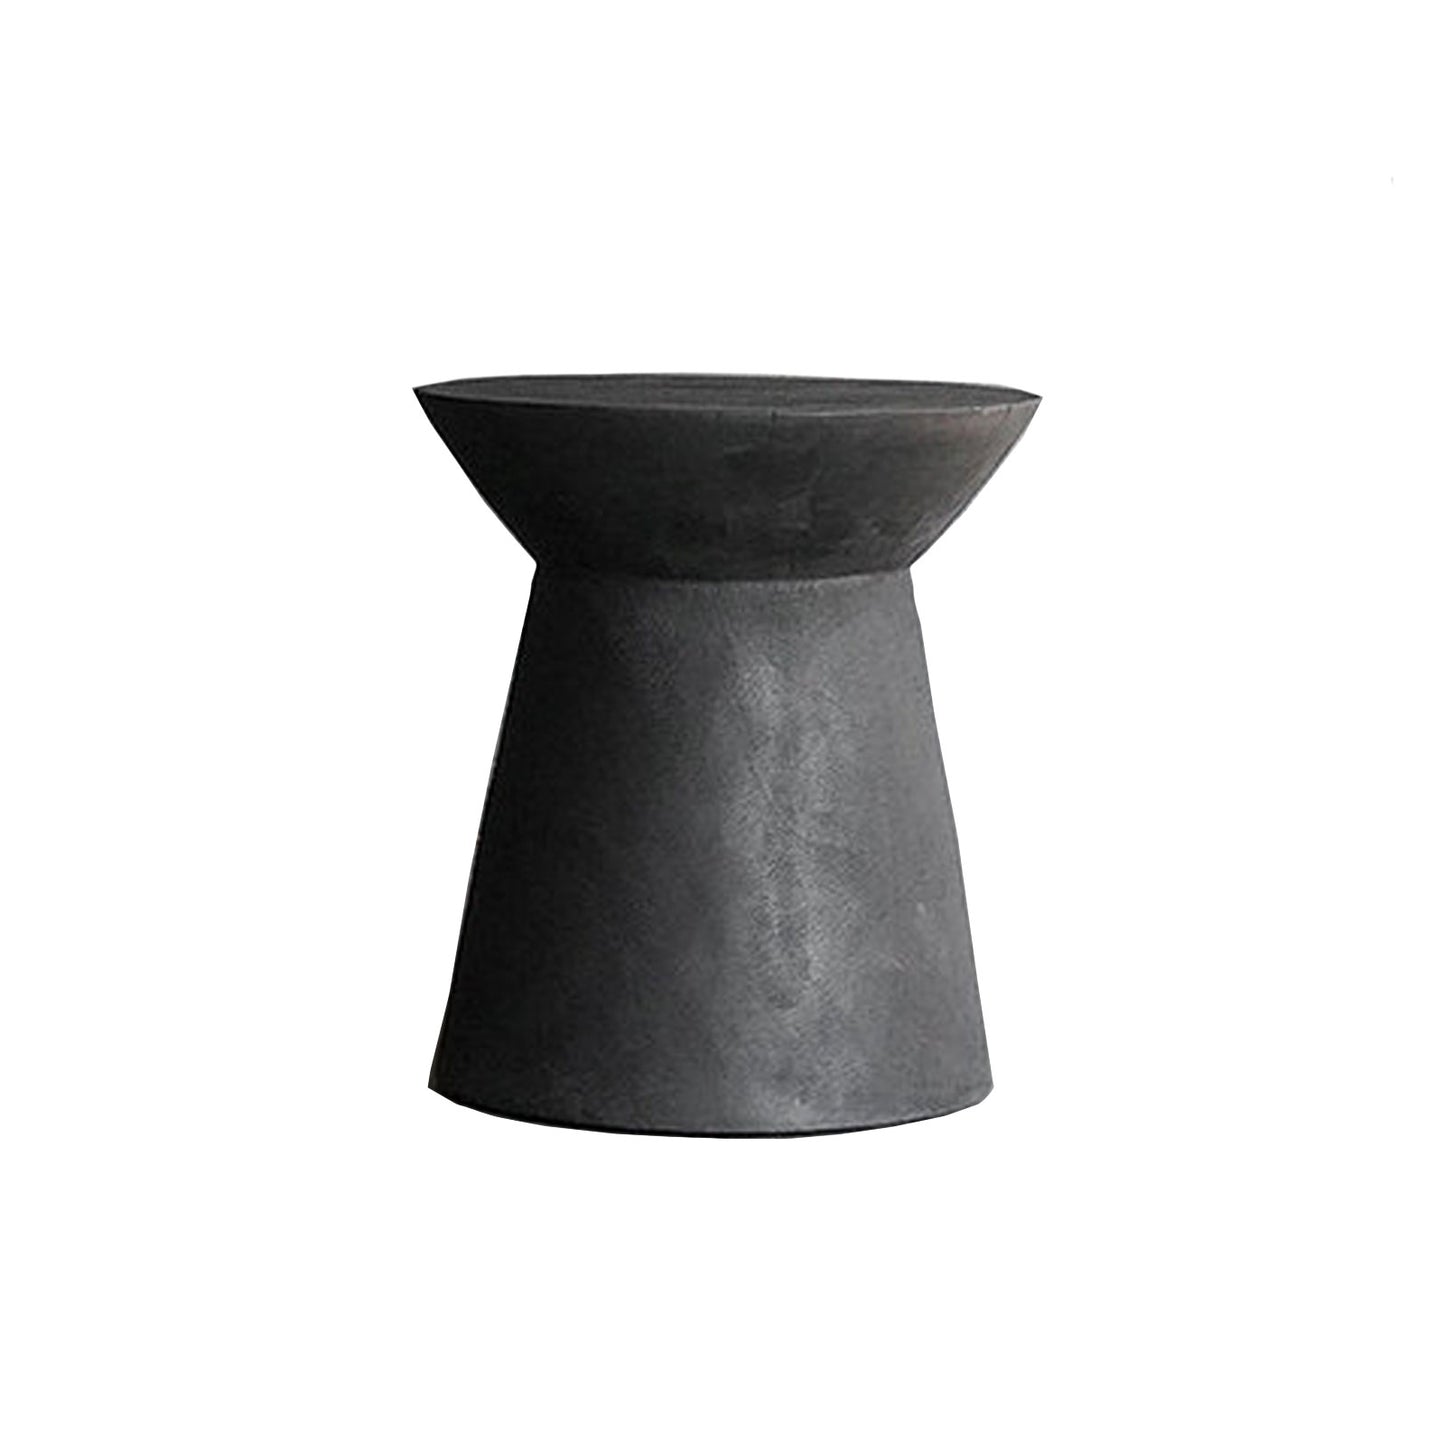 Mushroom Stool in Charcoal (Pick Up / Local Delivery Only)